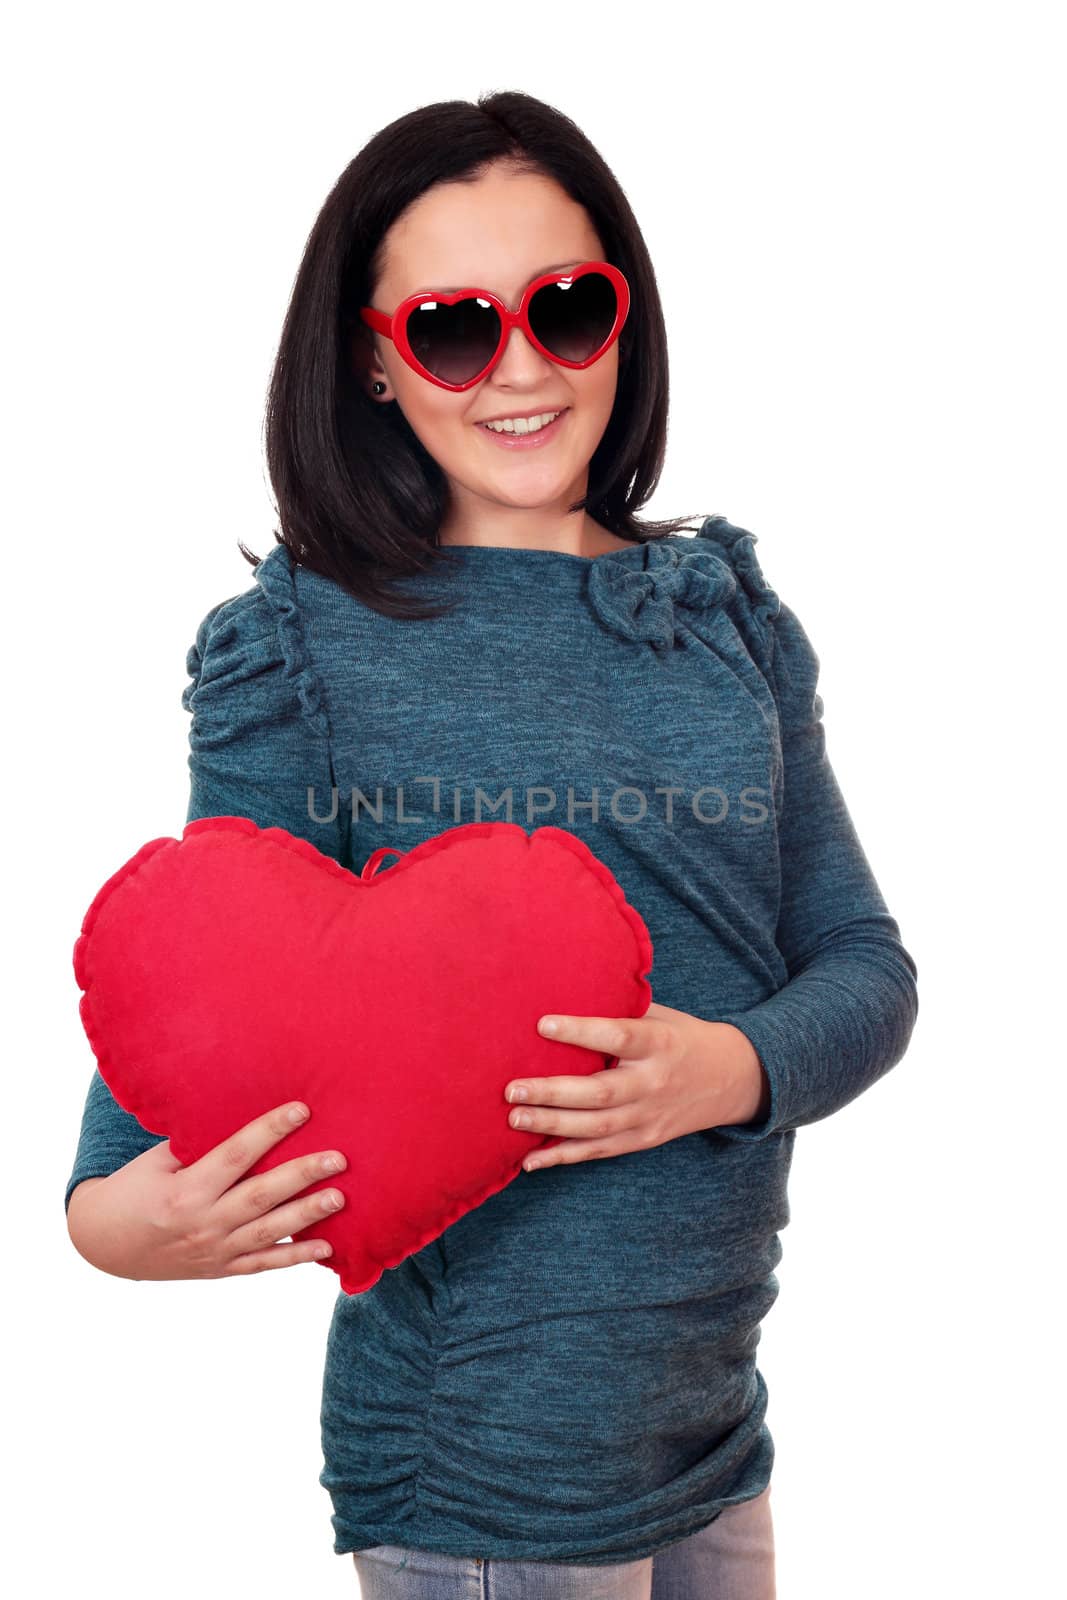 teenage girl with heart and sunglasses by goce